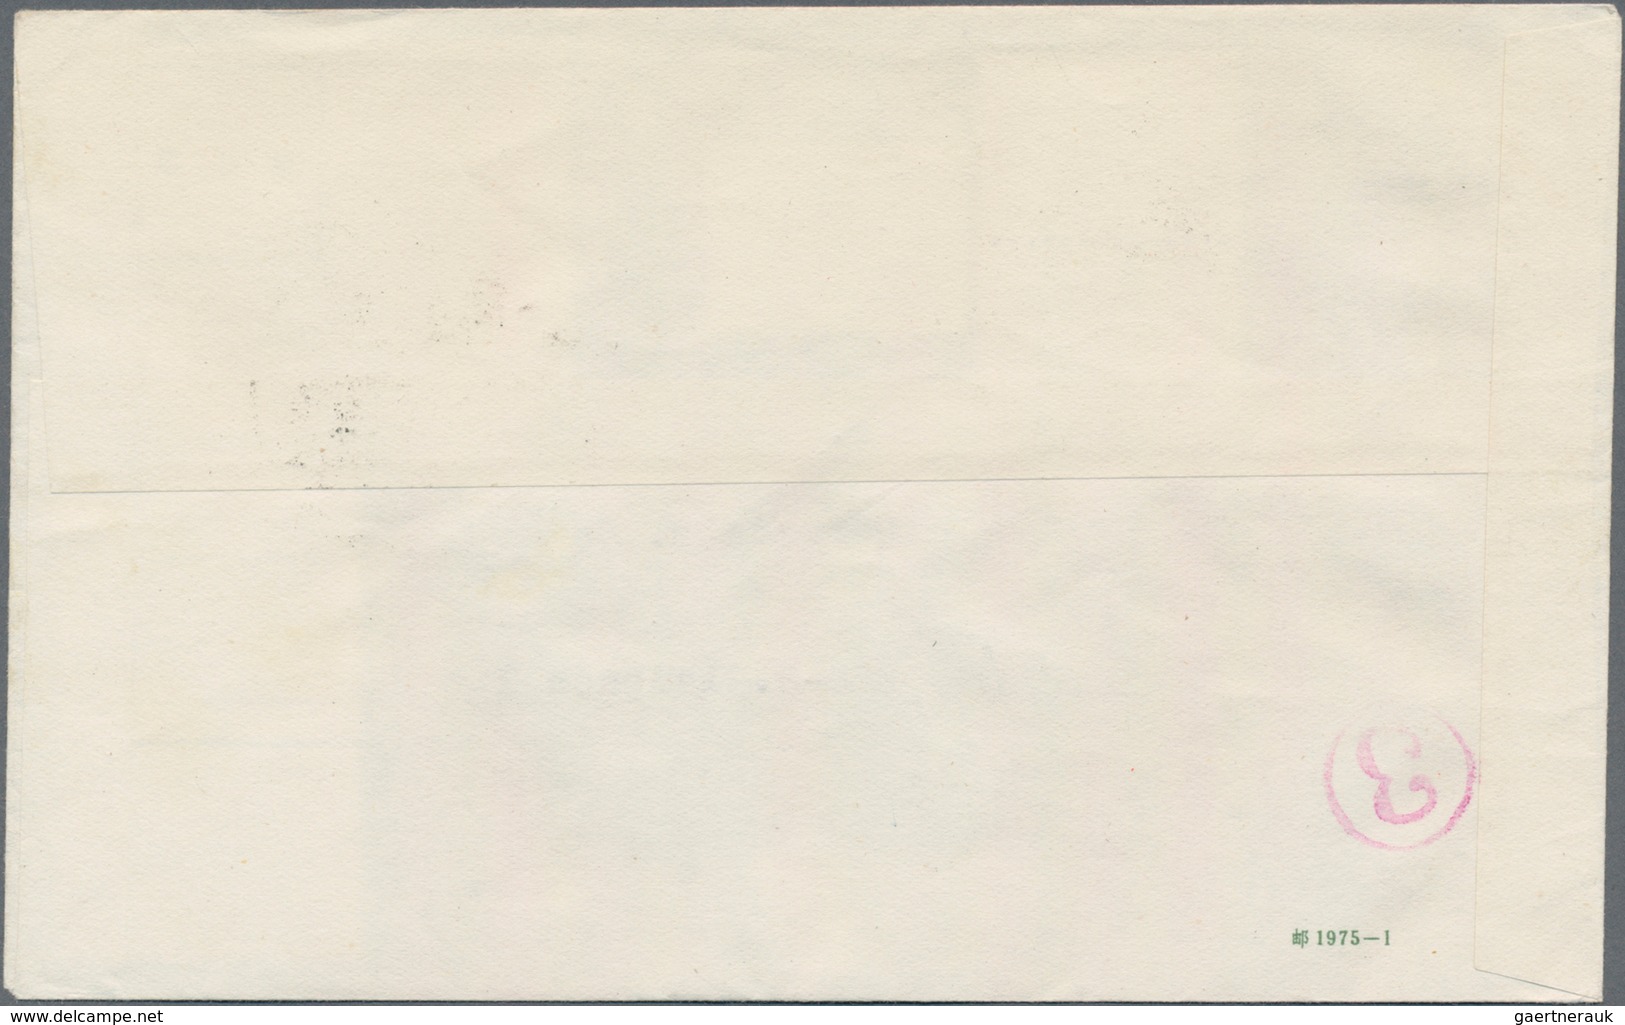 China - Volksrepublik: 1968/70, Air Mail Printed Matter Cover Addressed To Germany, Bearing Mao's An - Briefe U. Dokumente